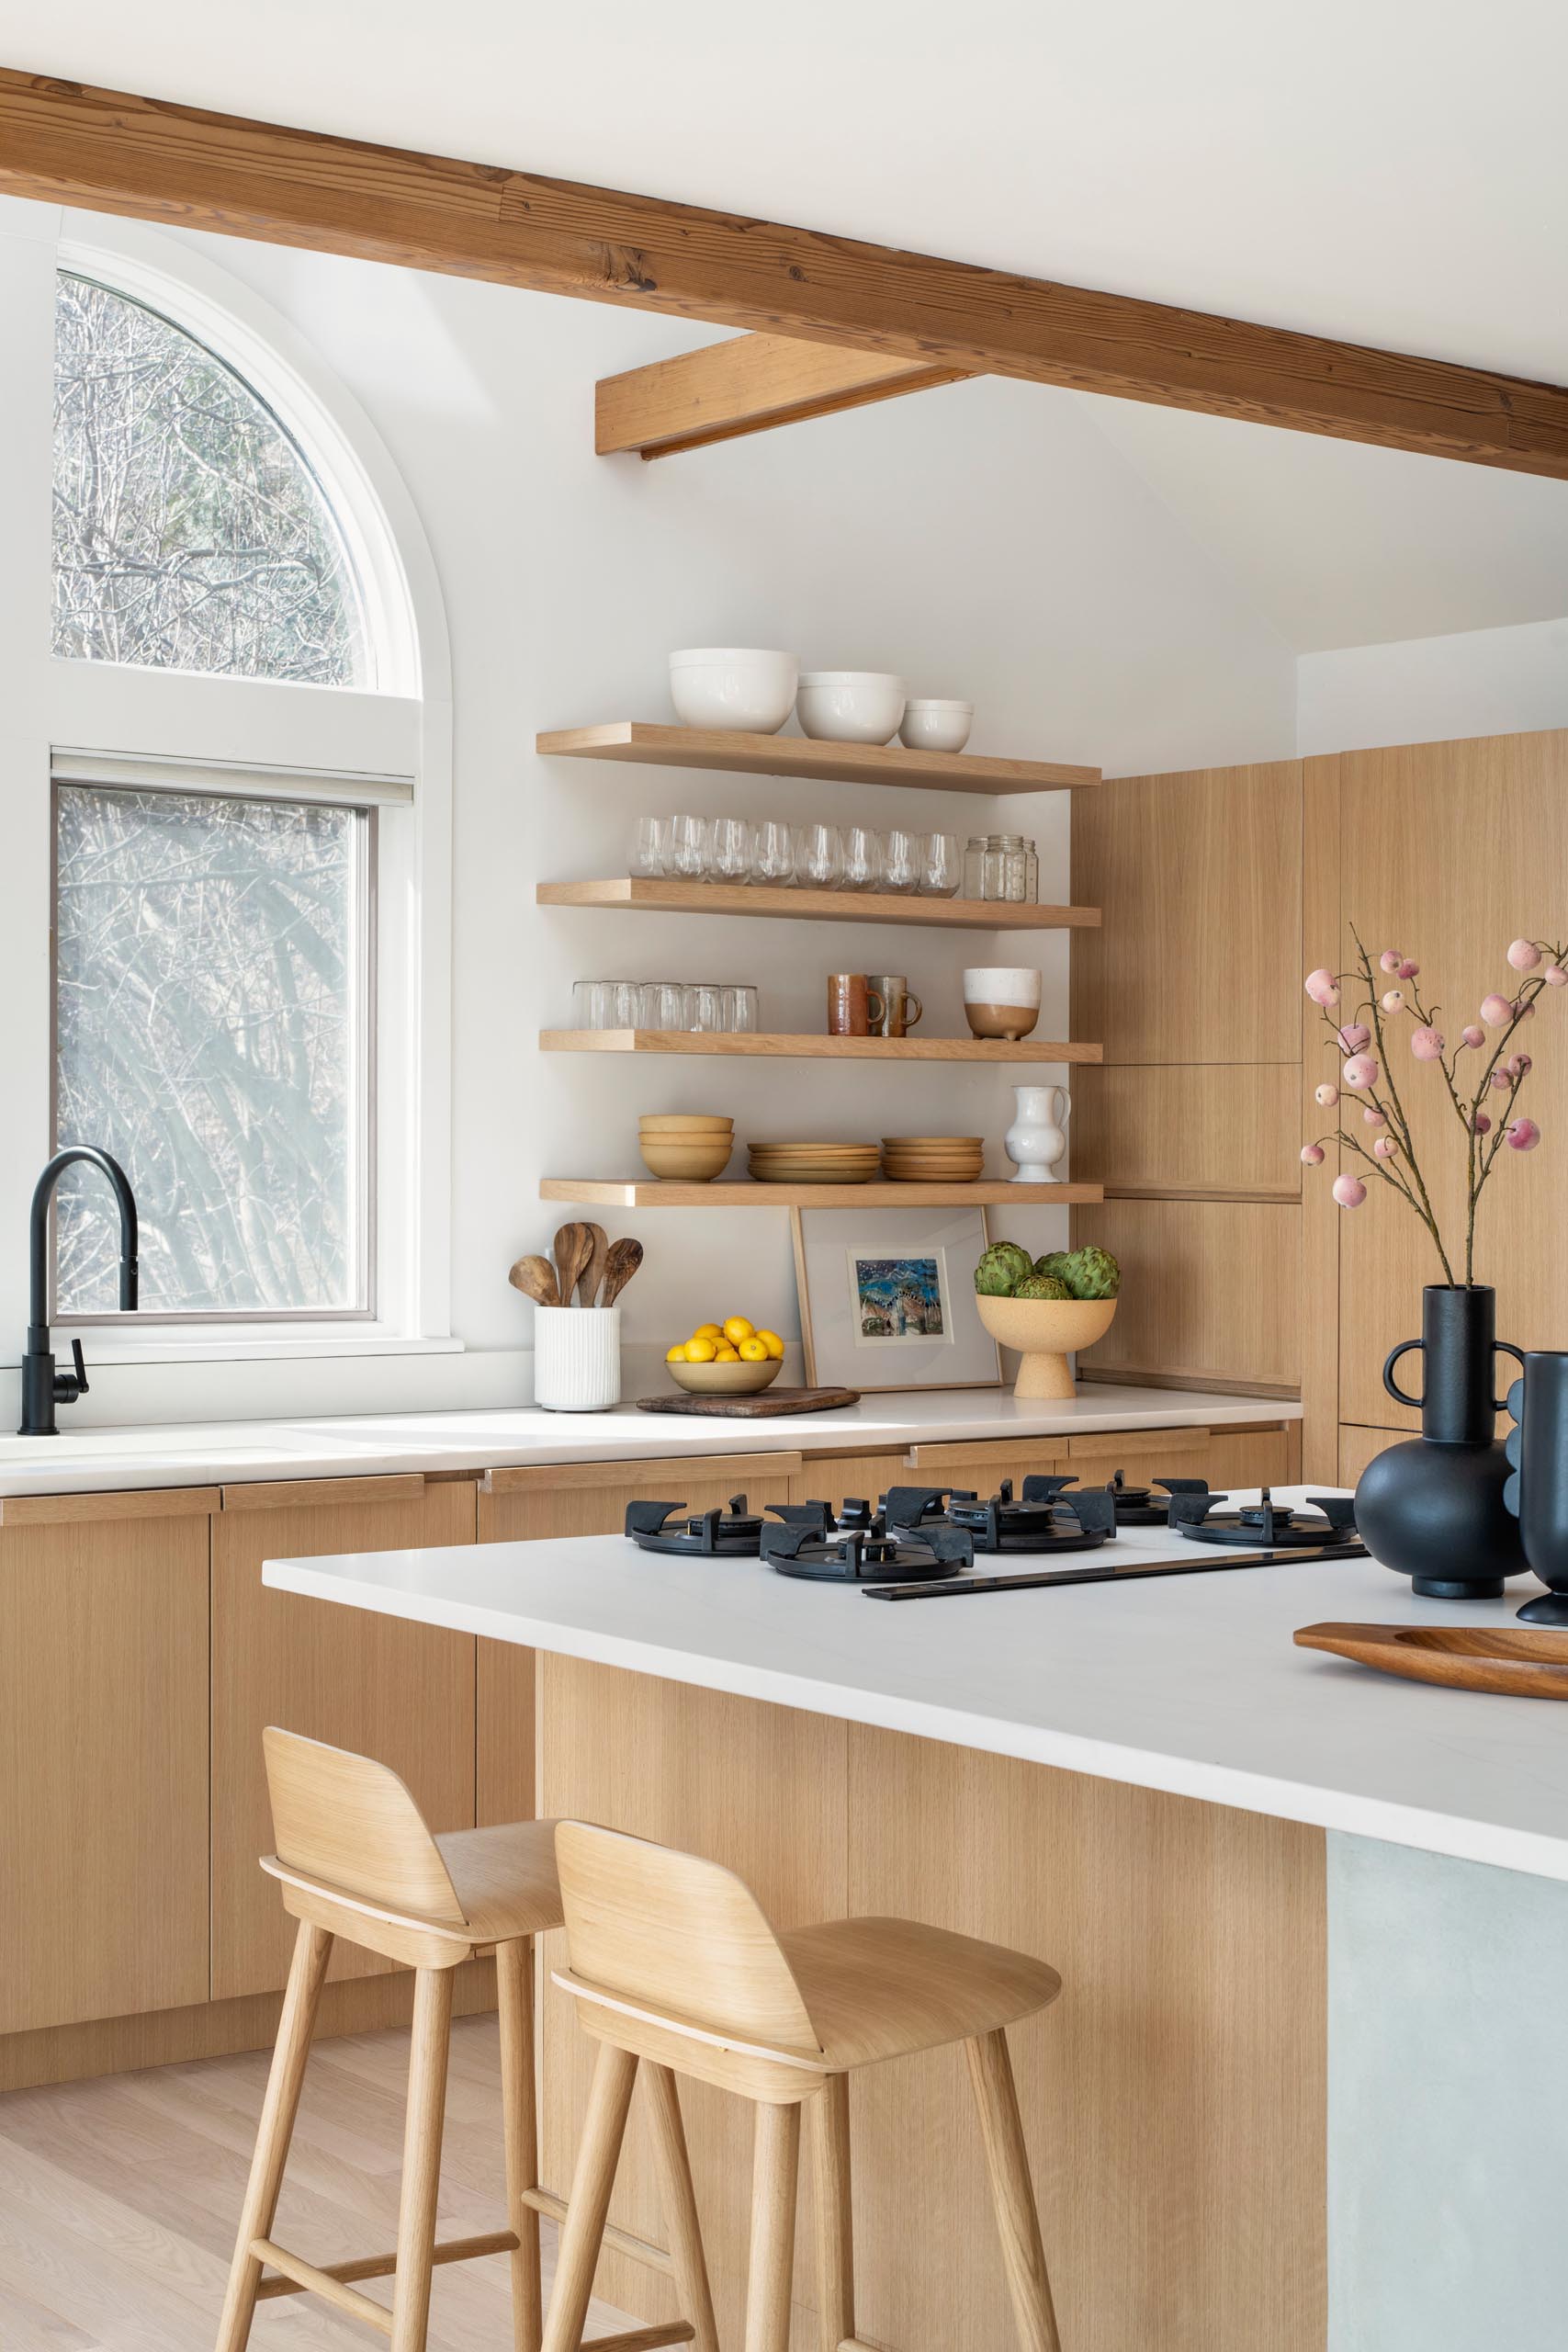 A remodeled kitchen with water-based white rift oak for the cabinets, open shelving, a large island, and quartz countertops.